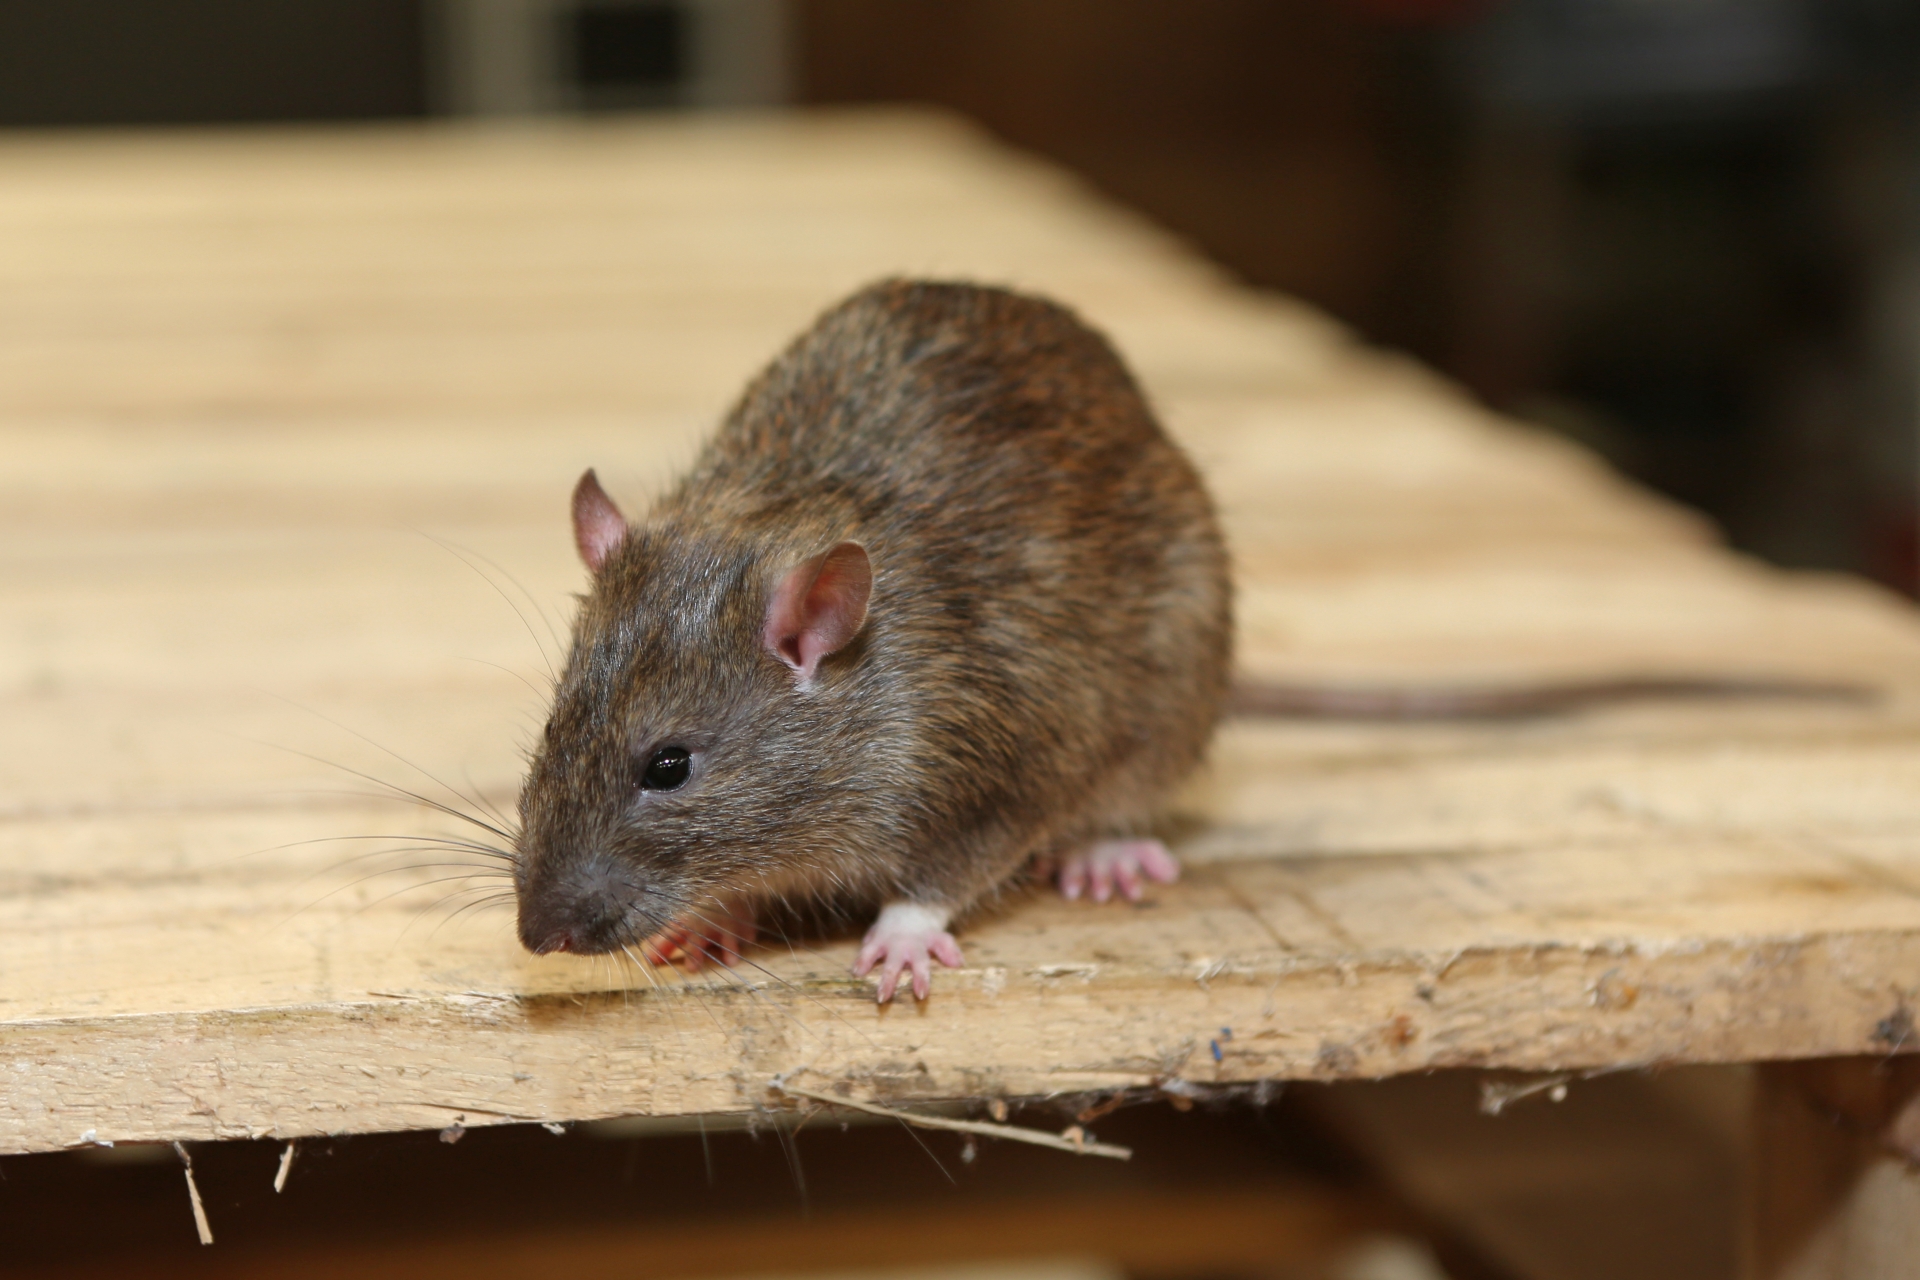 Rat extermination, Pest Control in Tulse Hill, West Norwood, SE27. Call Now 020 8166 9746